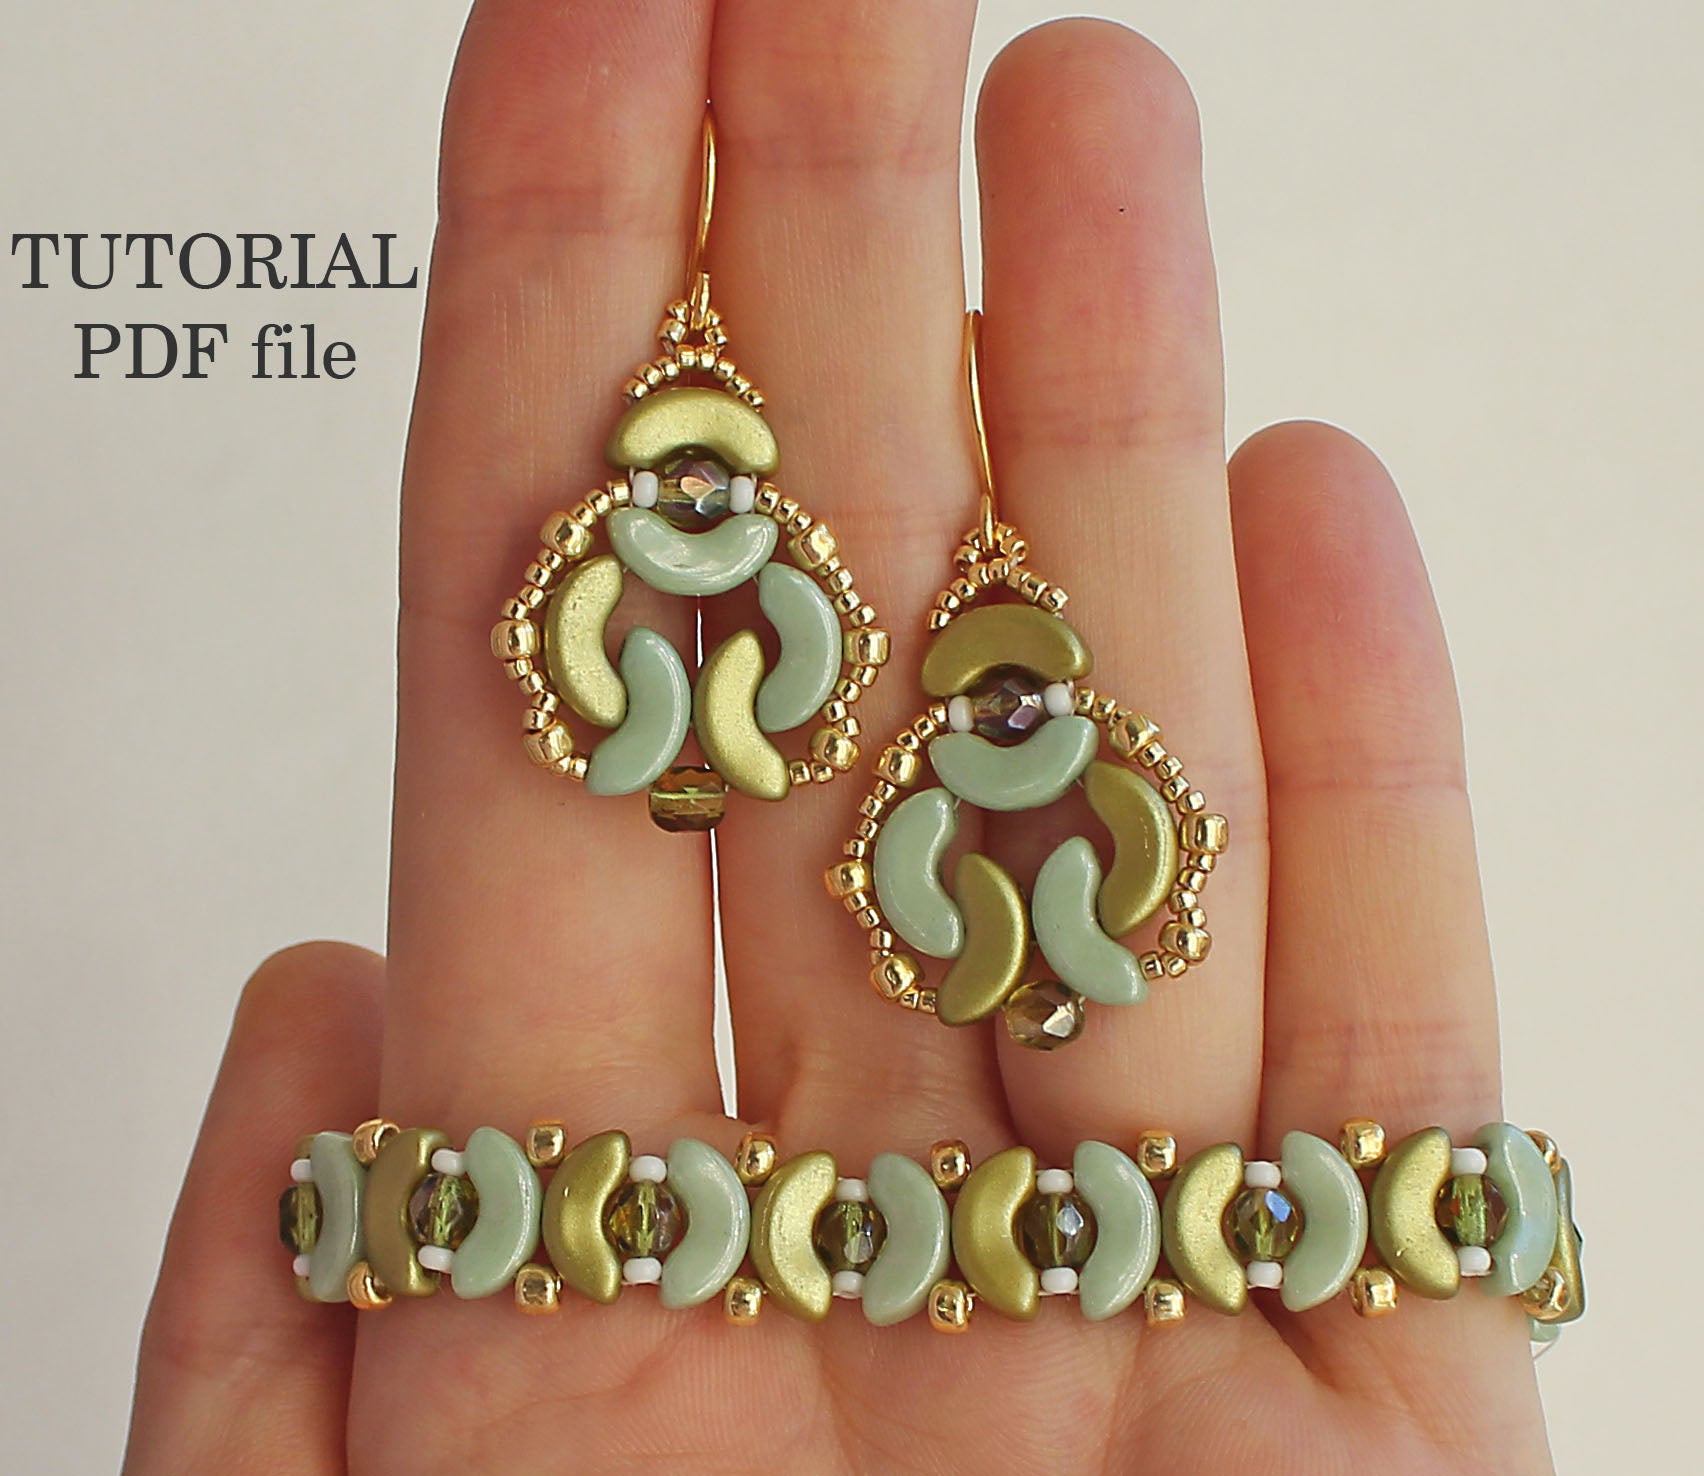 TUTORIAL JEWELRY SET “OLIVE” (Special file free for ScaraBeads)